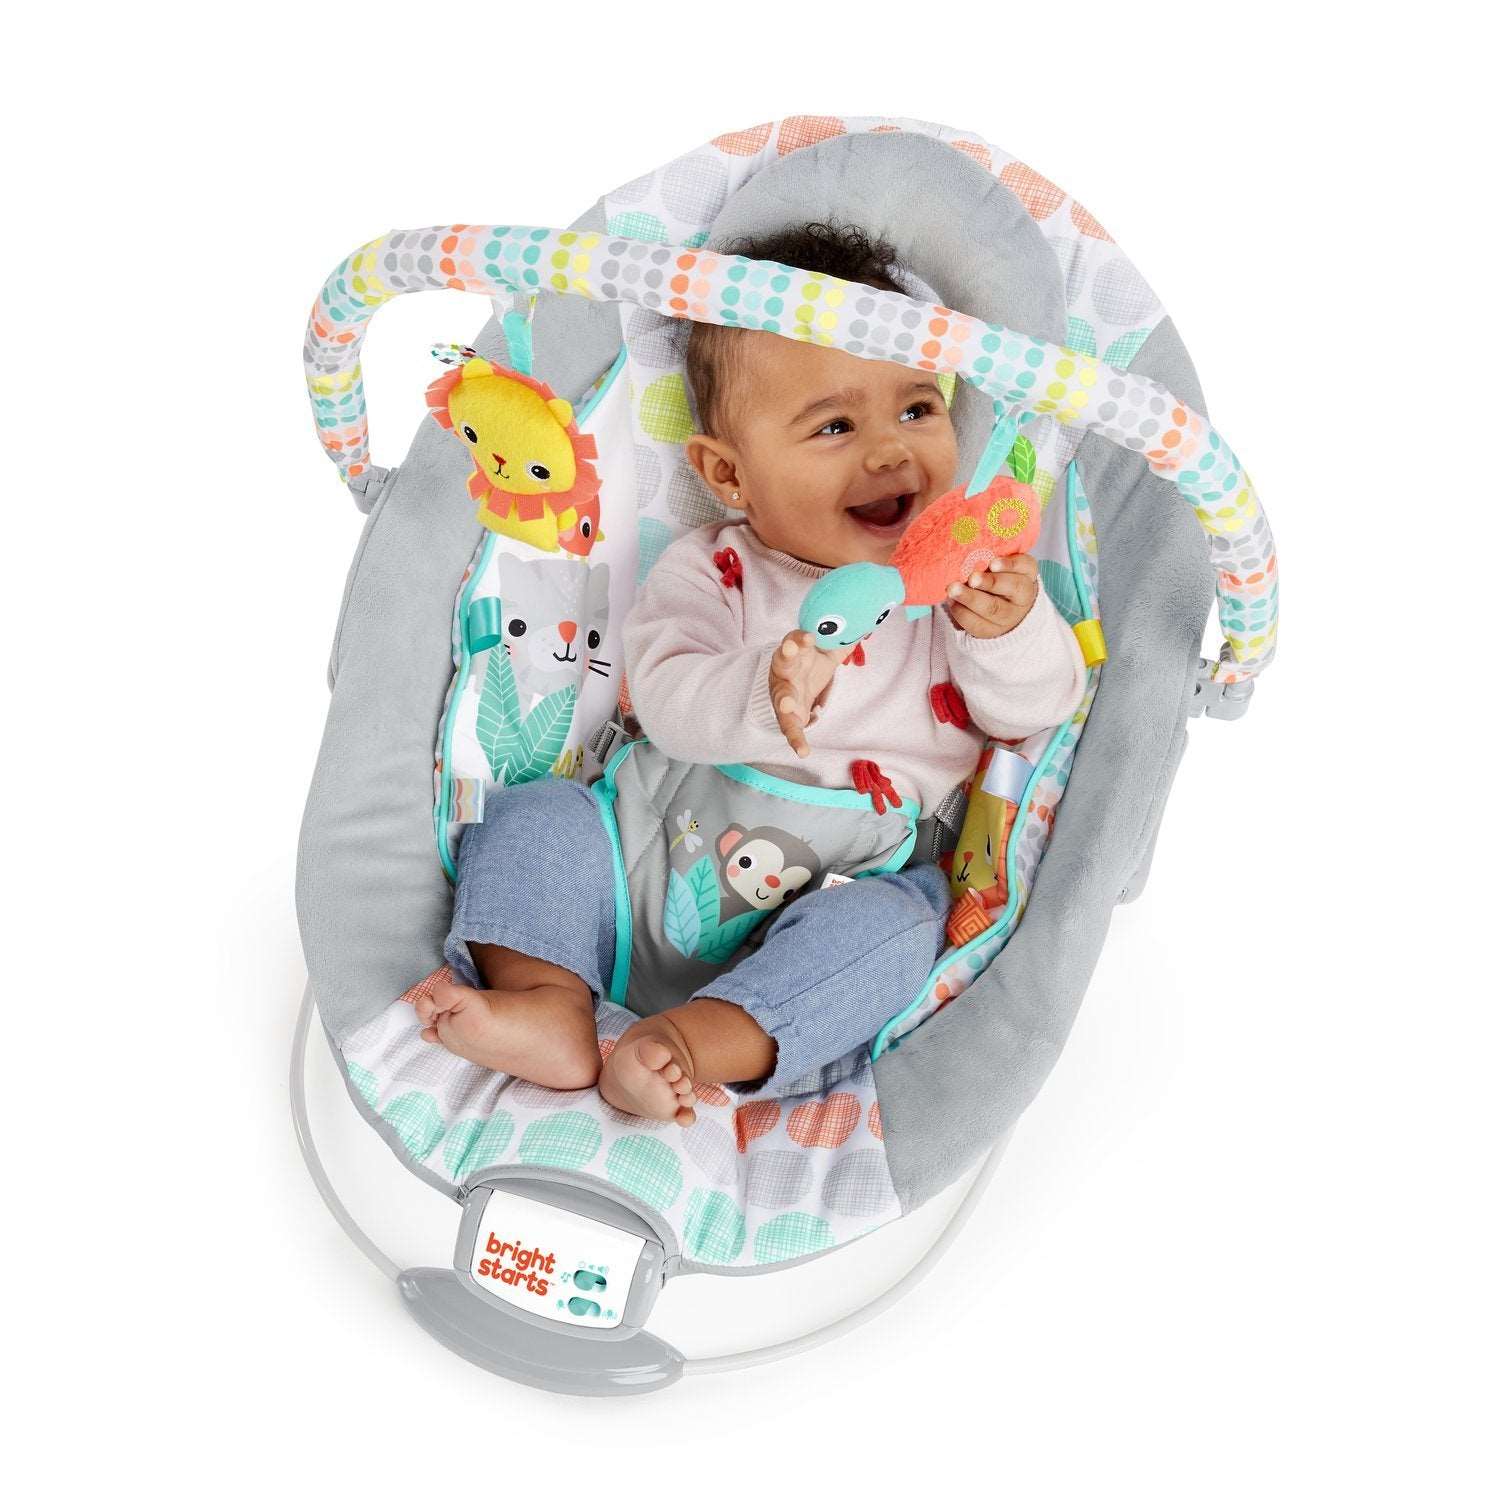 Bright Starts Cradling Bouncer - Whimsical Wild